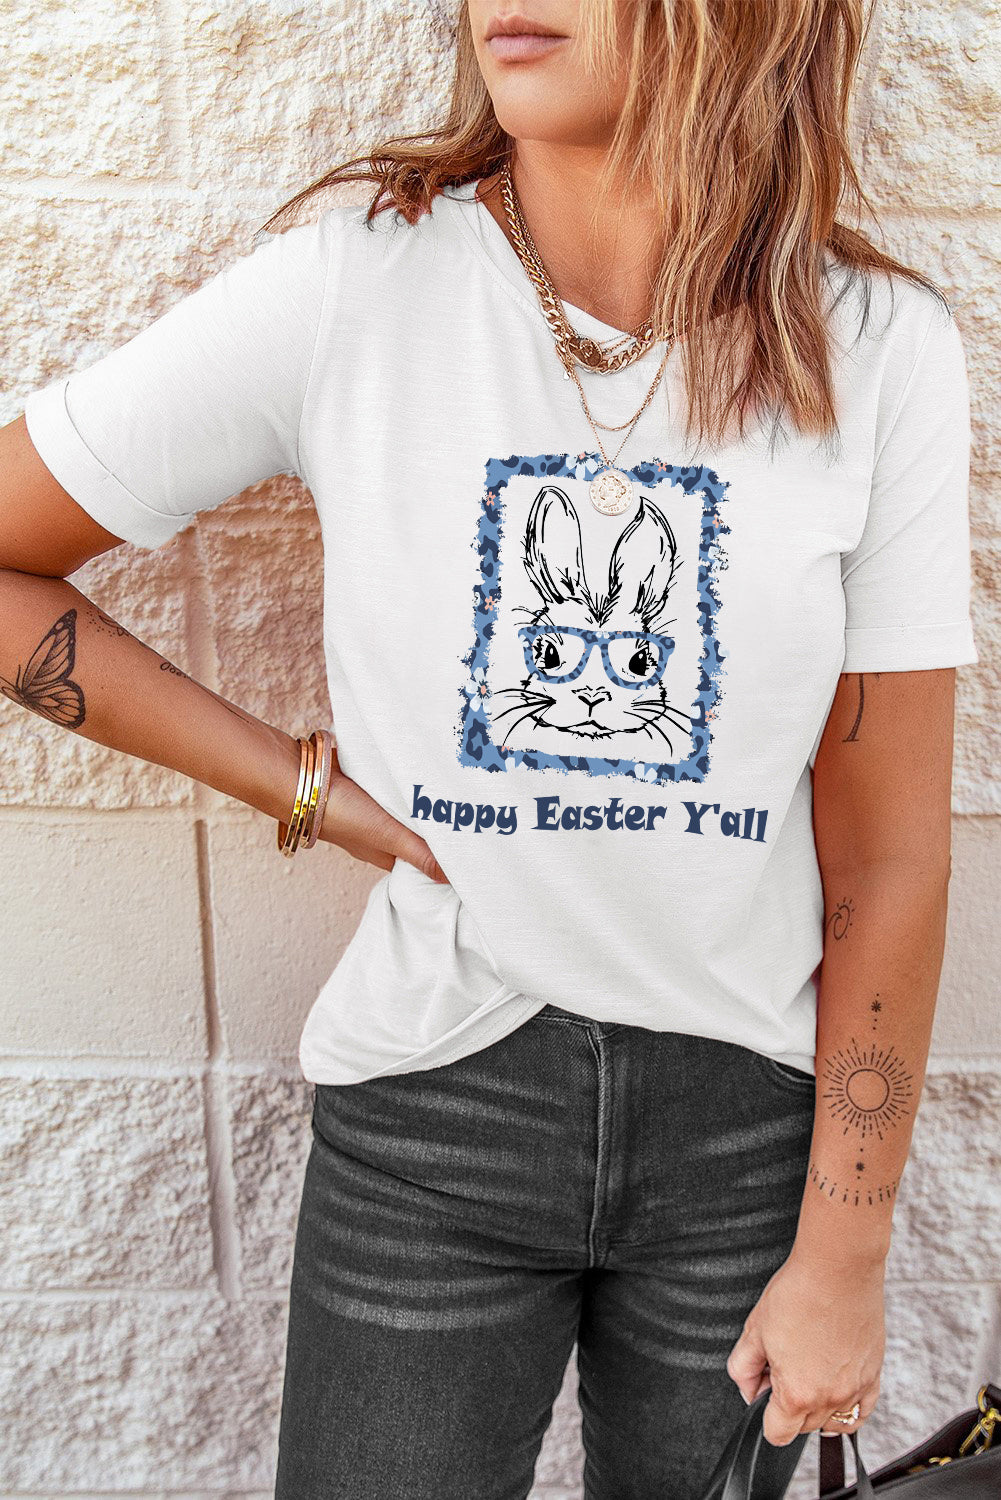 White Happy Easter Y’all Crew Neck T Shirt Bunny Tee Tops LC25214937-1